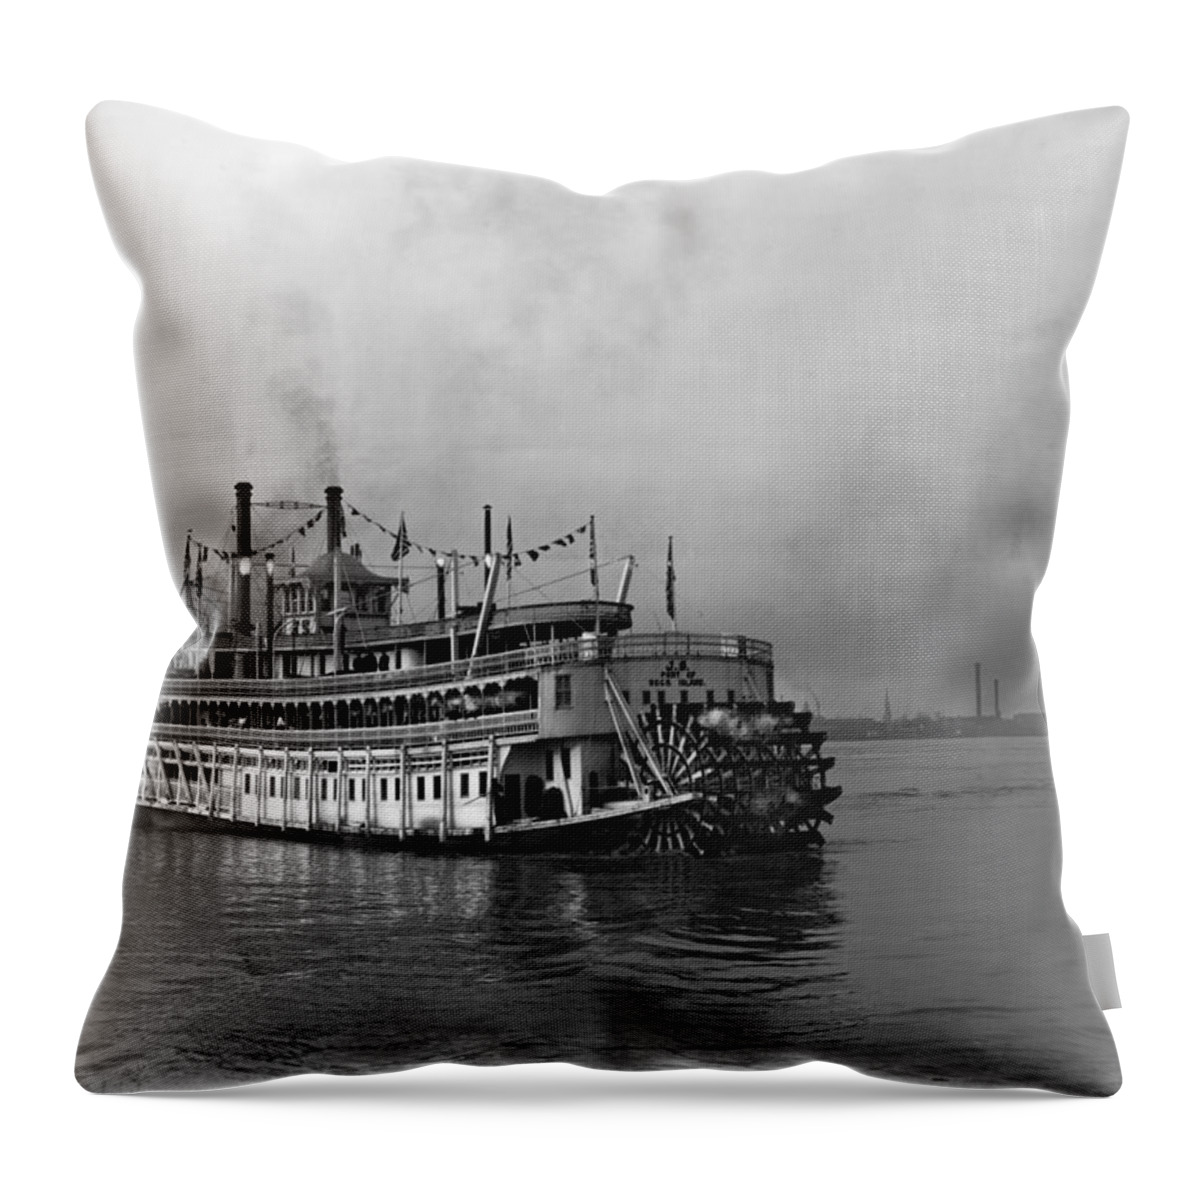 1910 Throw Pillow featuring the photograph New Orleans Steamboat by Granger